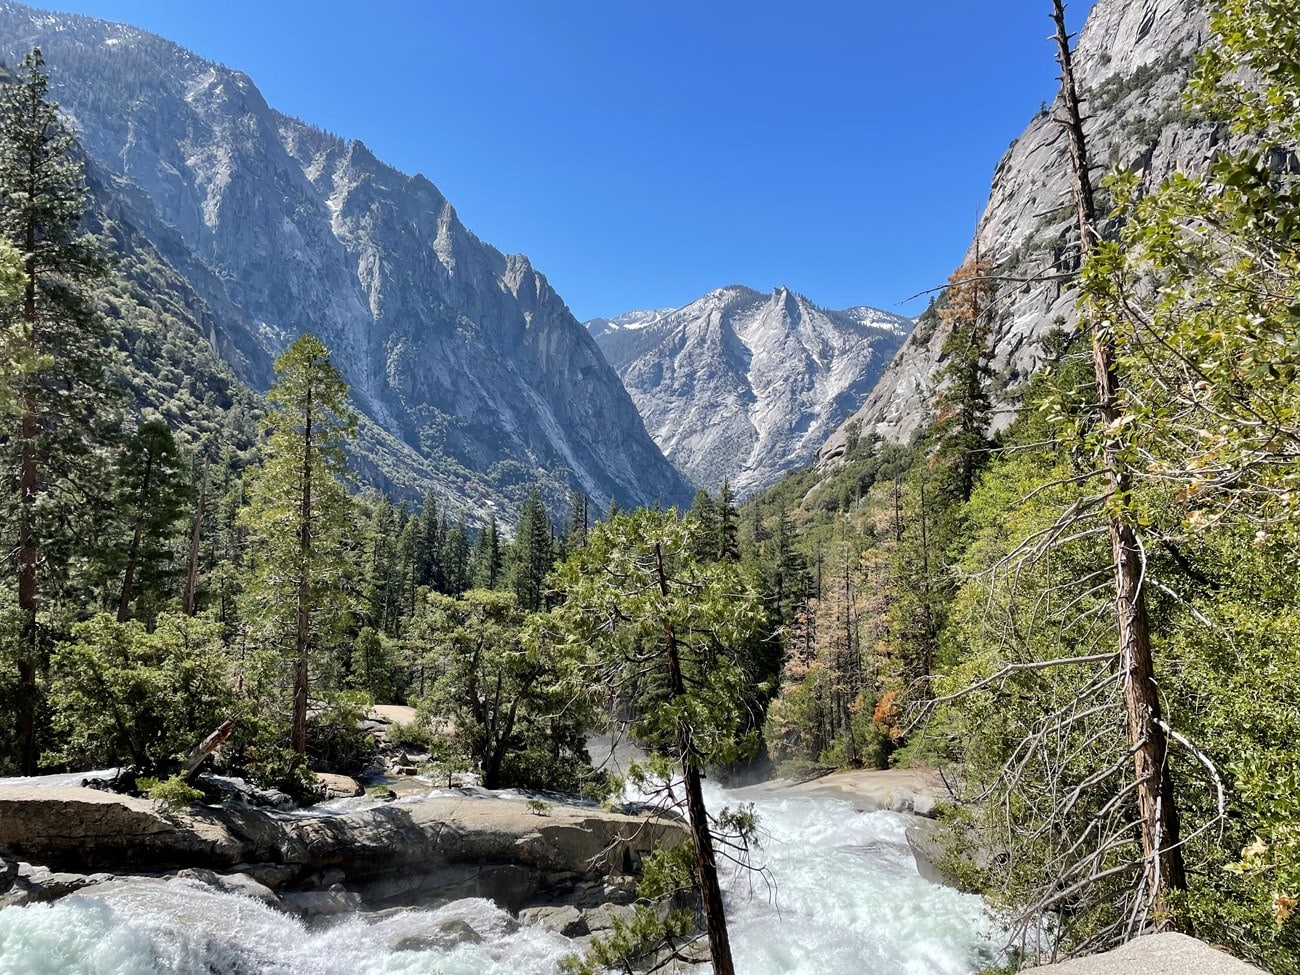 Things to do in Kings Canyon National Park